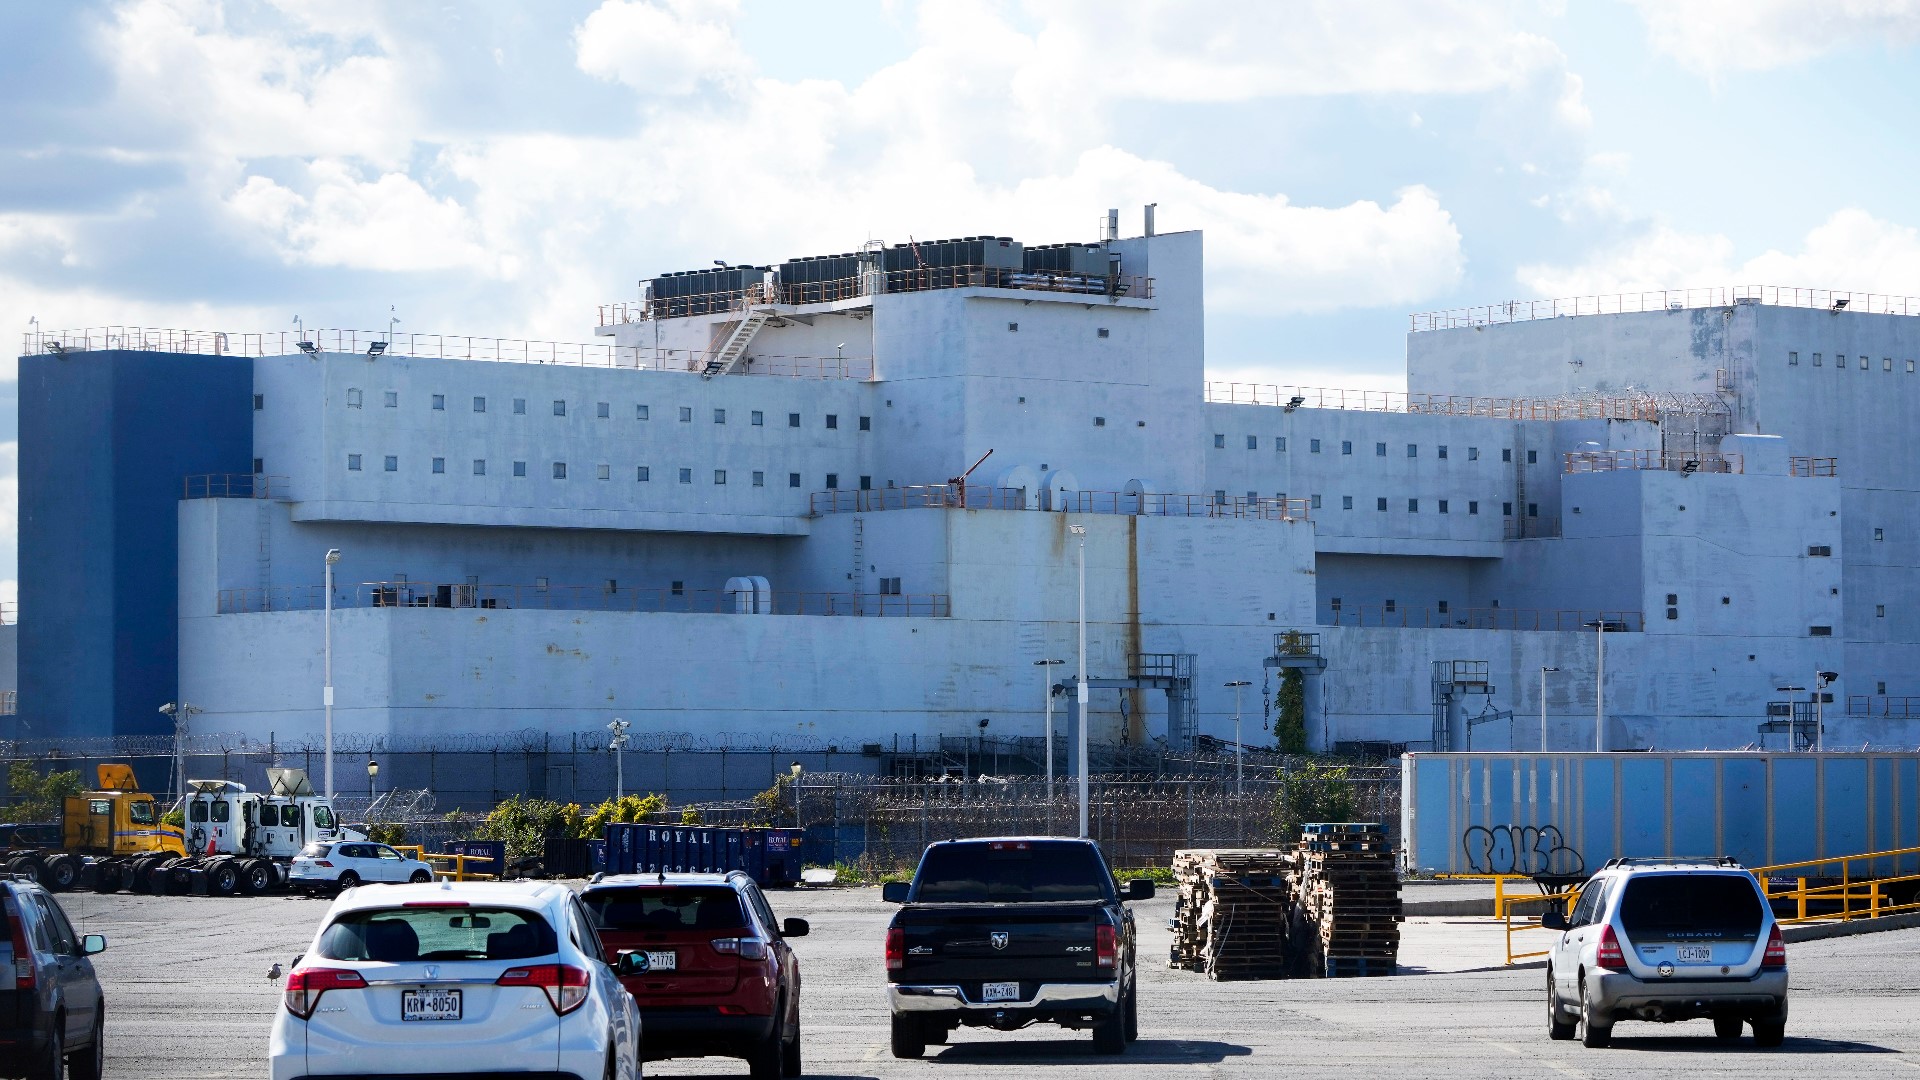 The ship will be fully vacated by the end of this week, officials said, as part of a broader plan to replace New York's long-troubled correctional system.